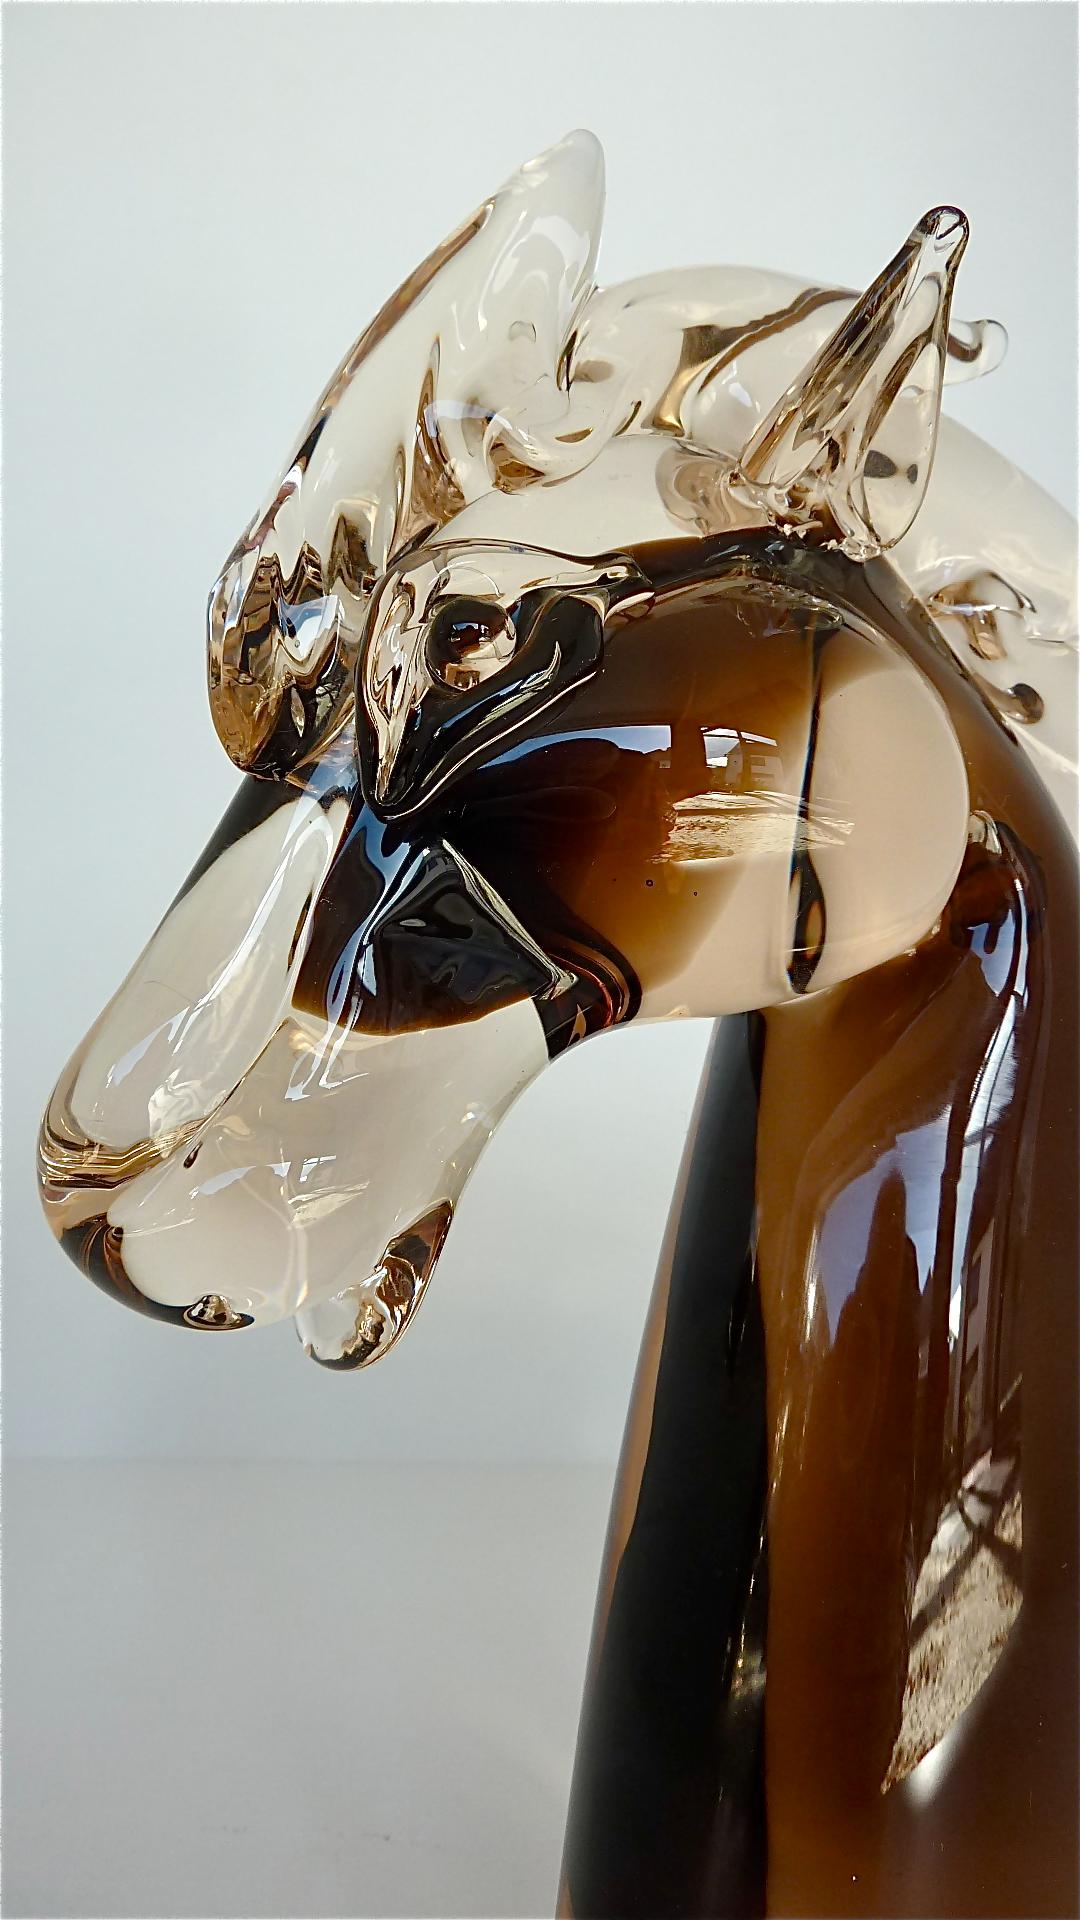 Amazing brown and clear glass horse head sculpture probably executed by the master glassblower Ermanno Nason for Nason & Moretti, Murano which can be dated around 1970. The expressive horse sculpture stays in perfect original condition with no